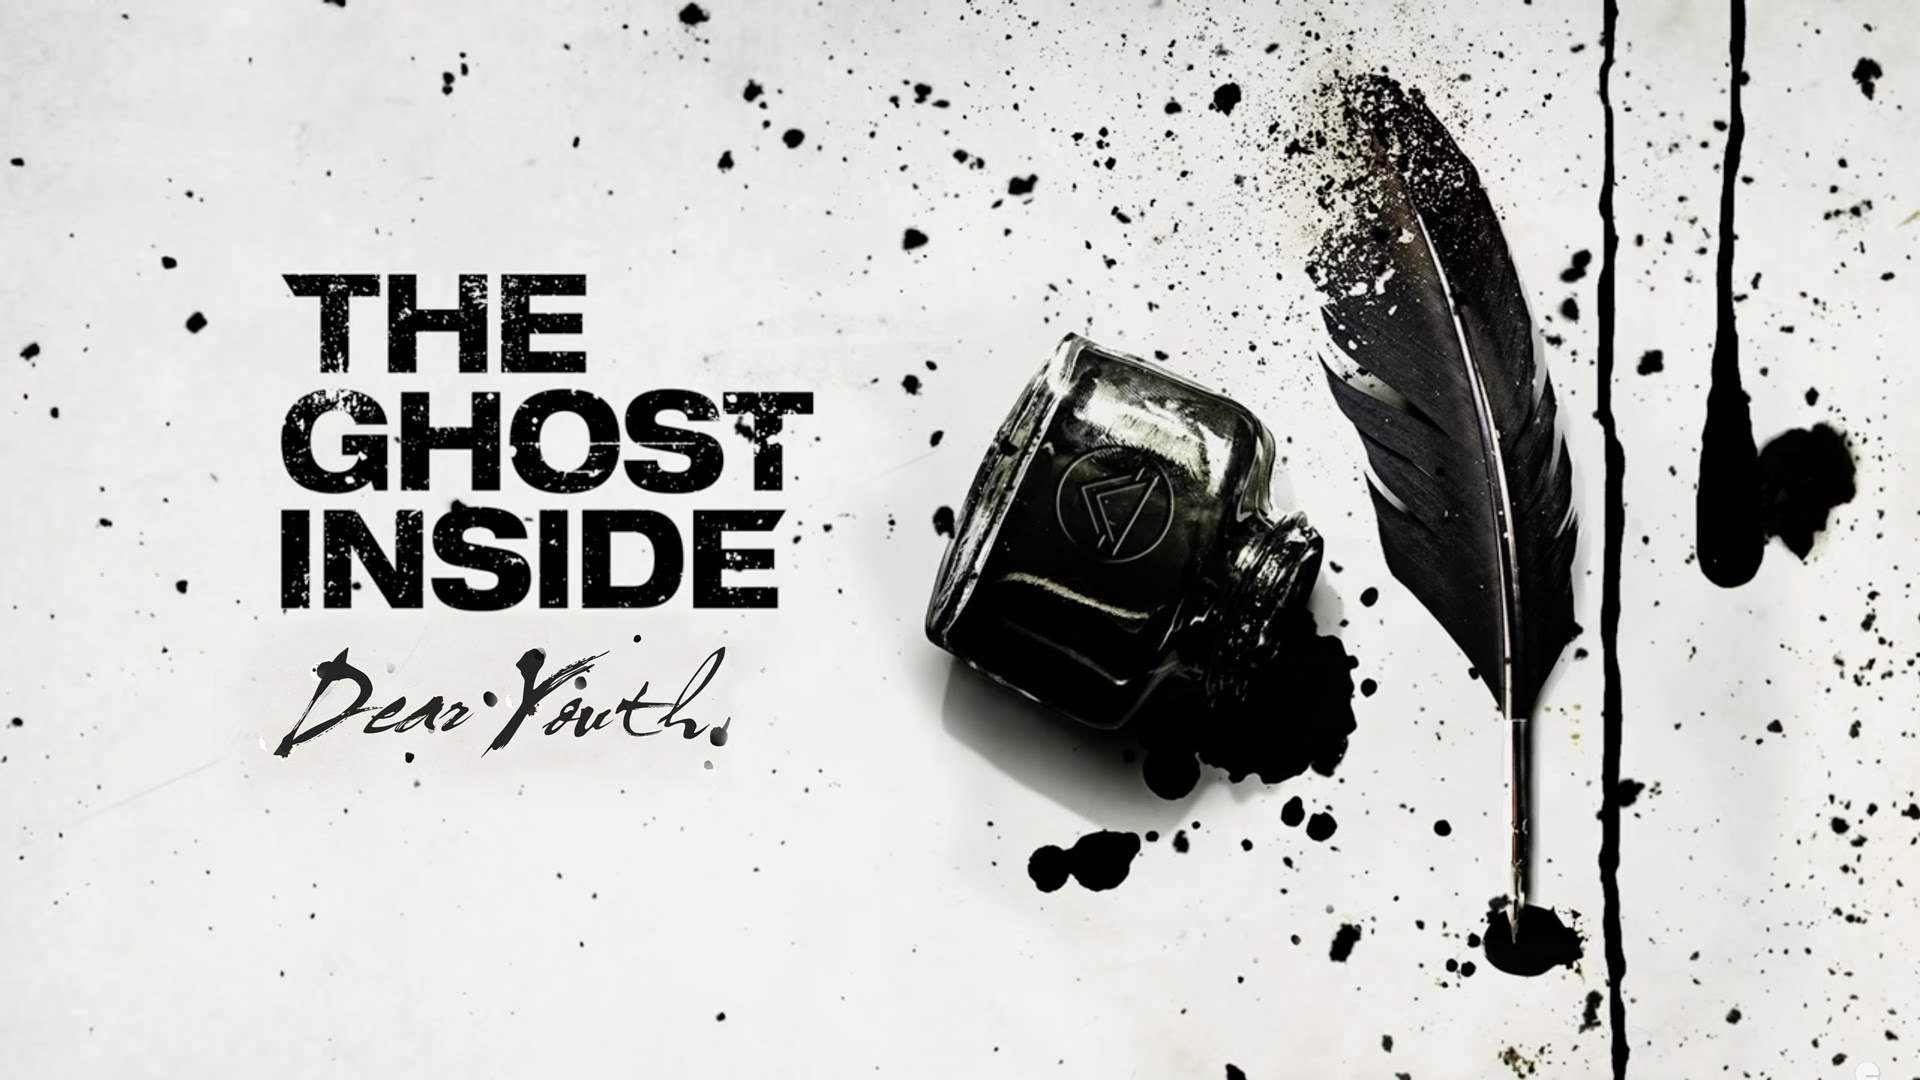 The Ghost Inside.